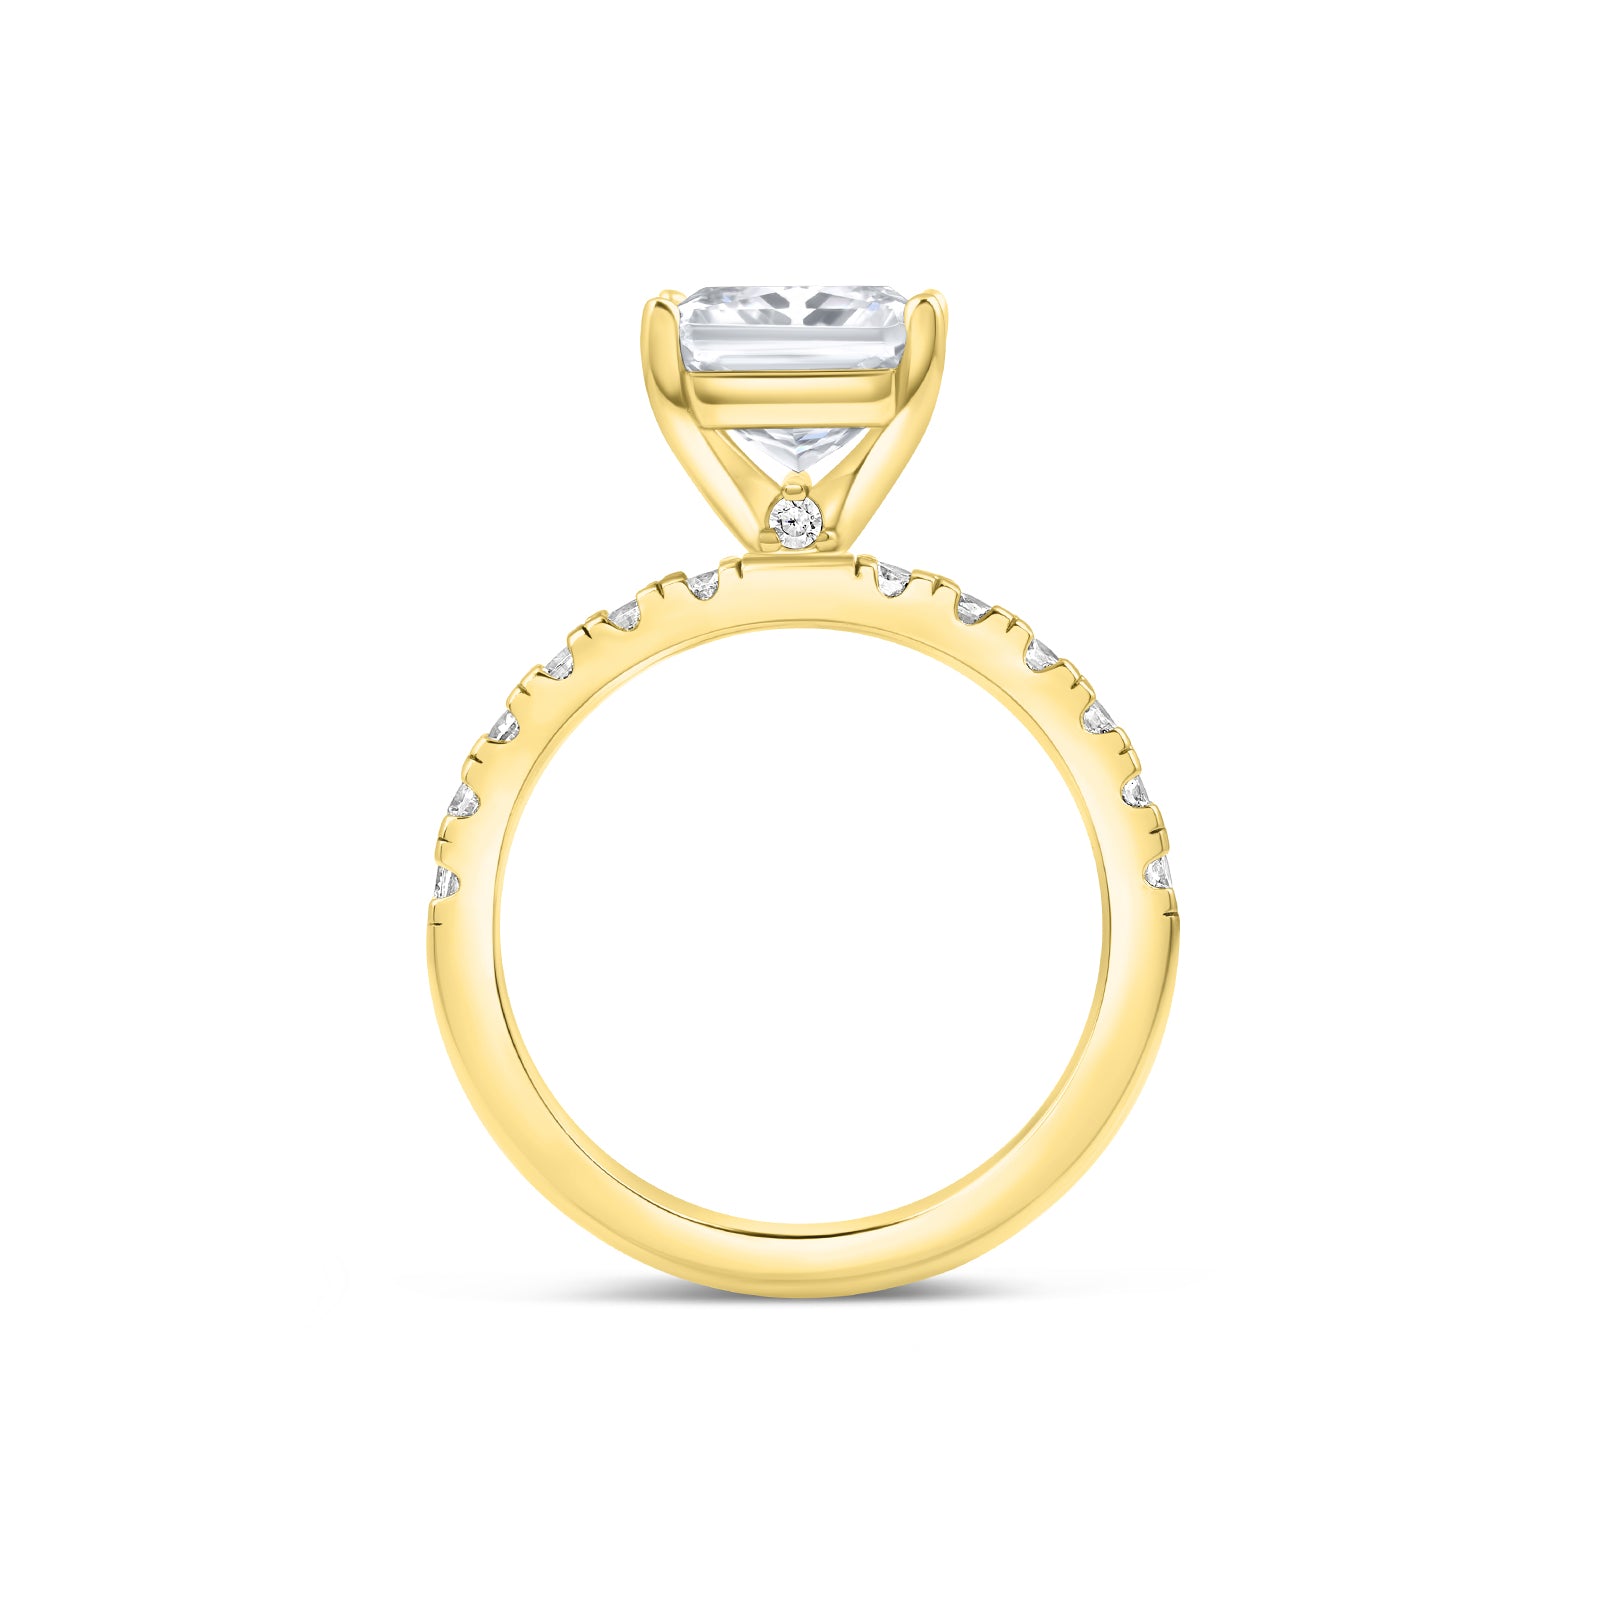 Band view of sleek gold radiant cut engagement ring with dainty stone detailing under its setting and a half eternity band